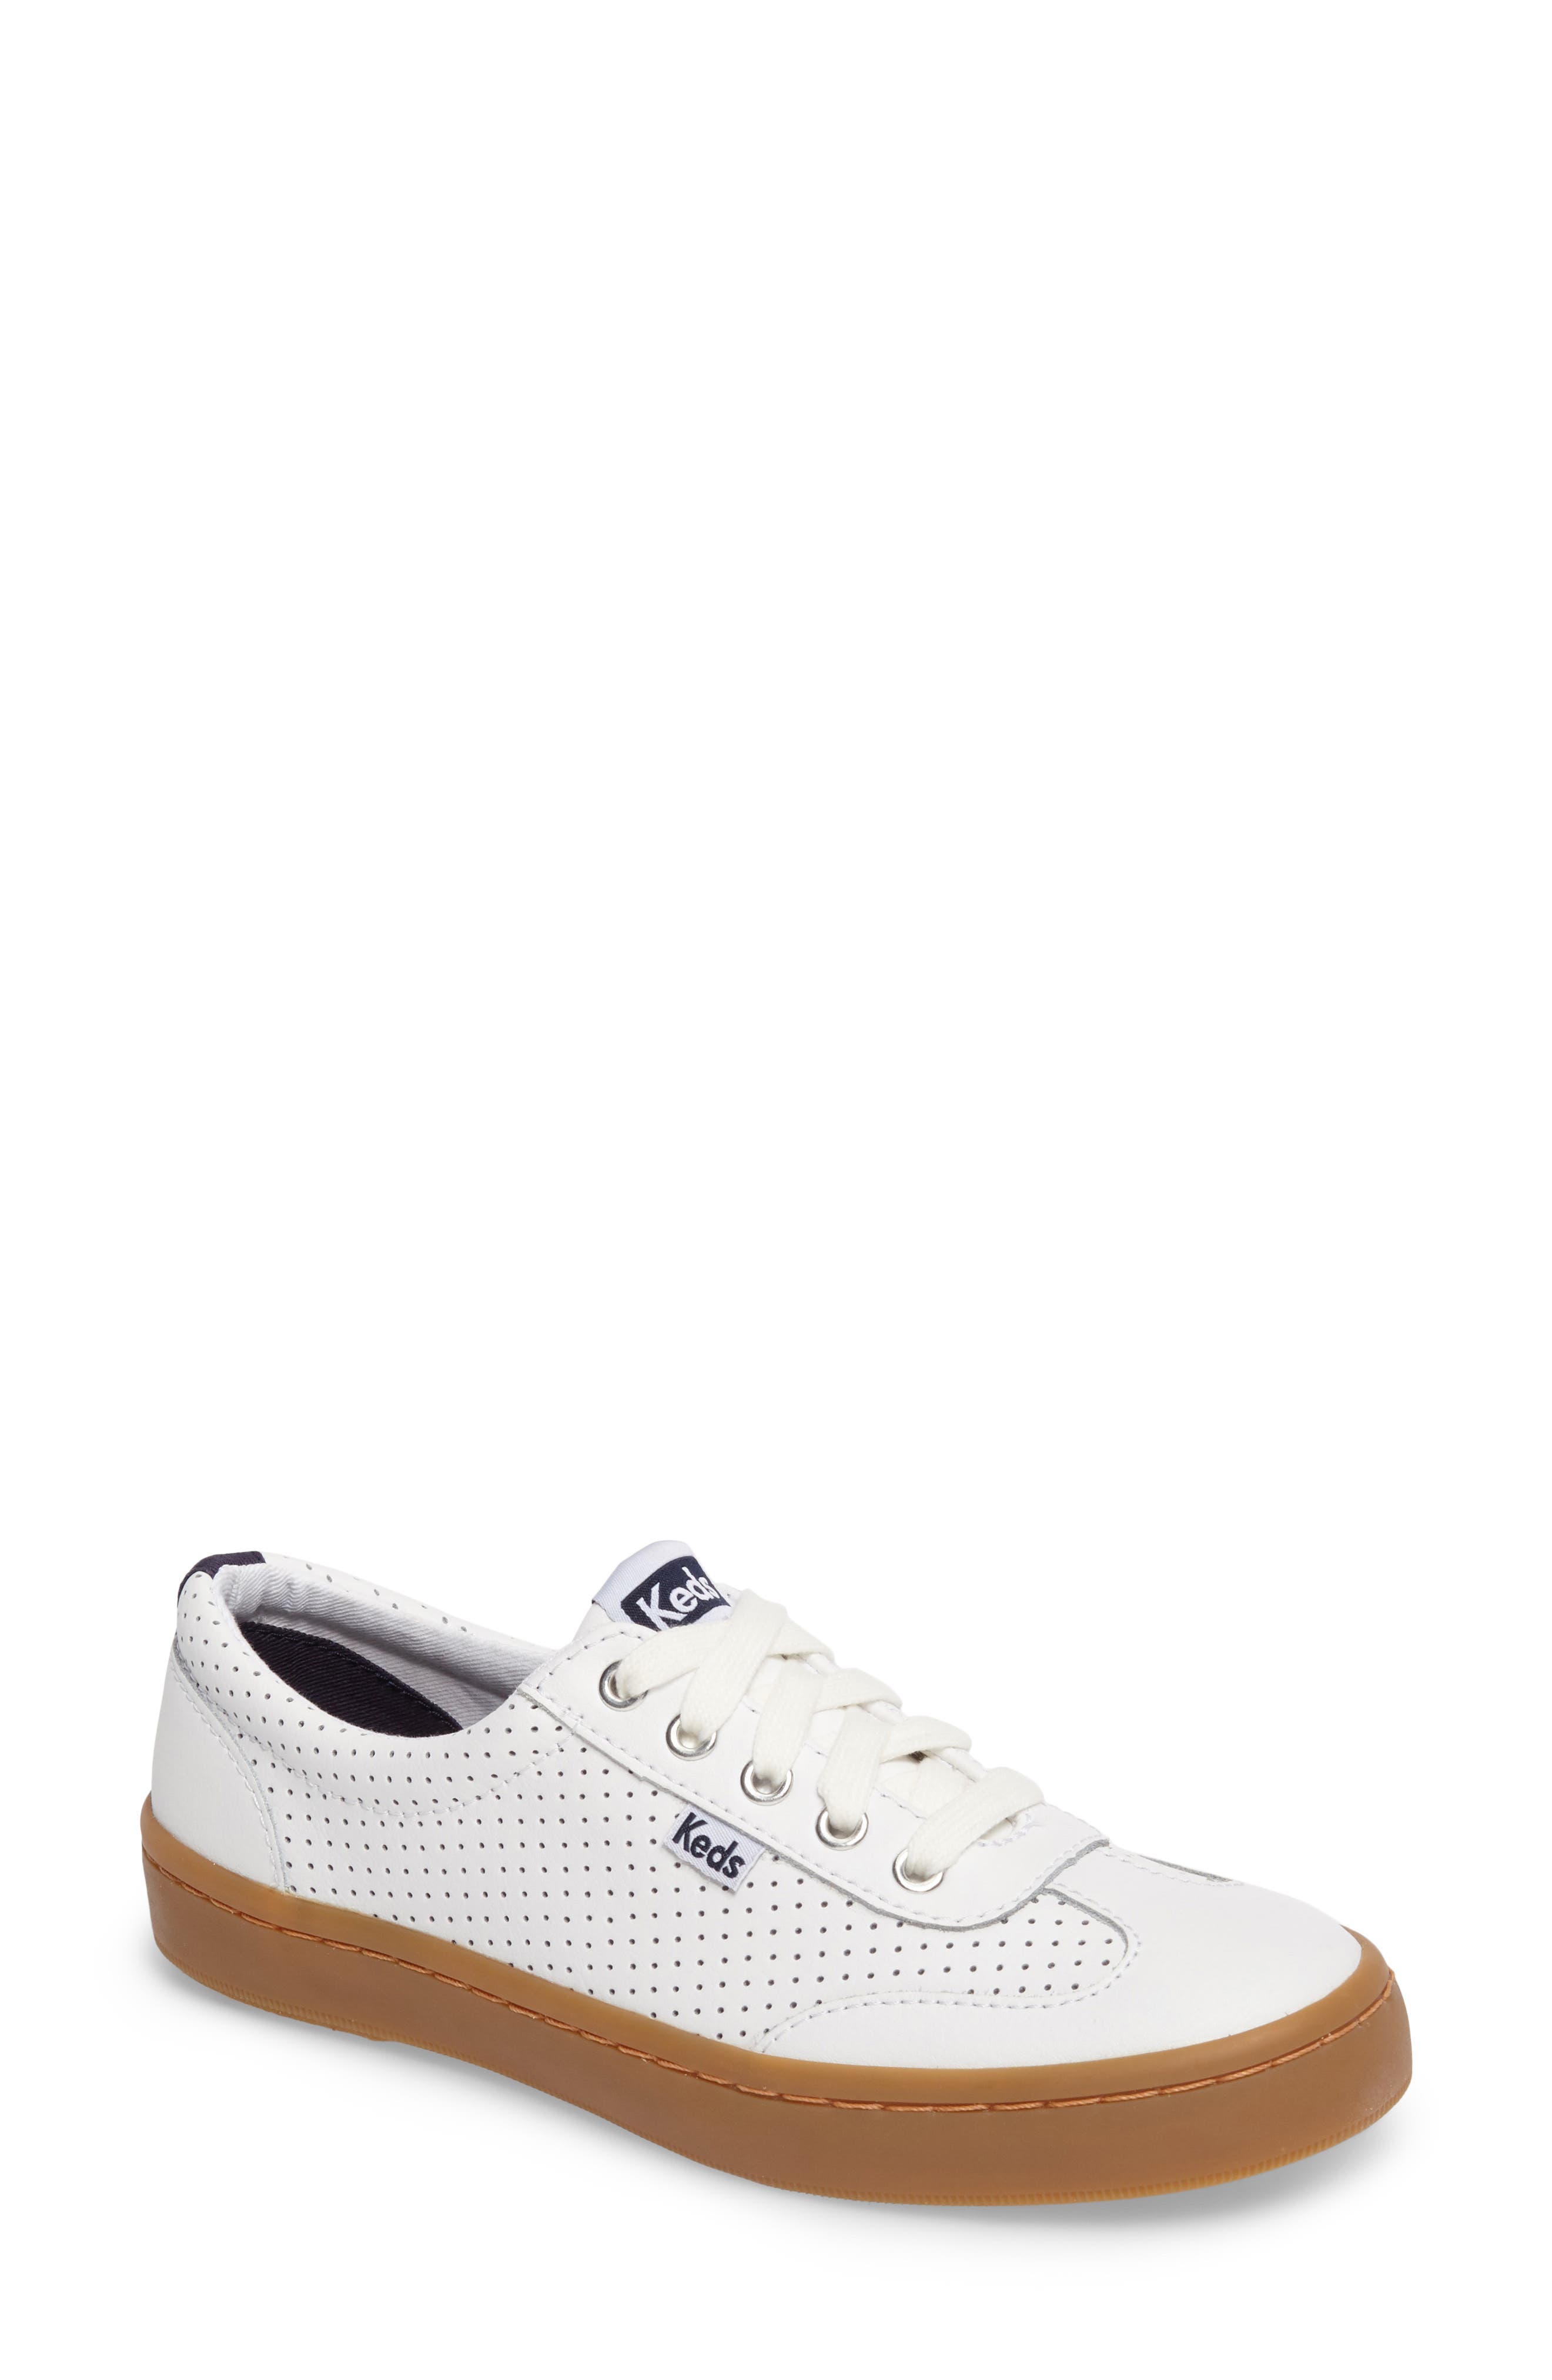 Keds | Tournament Perforated Leather 